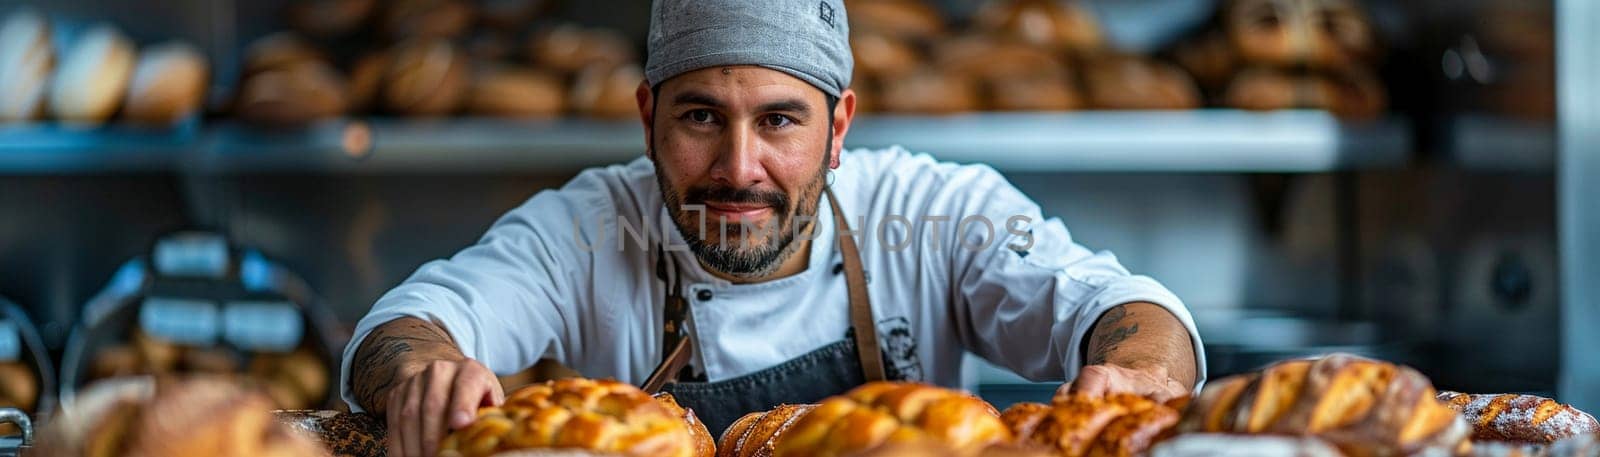 Artisan Baker Crafts Specialty Breads for Business Clients, The scent of fresh bread fills the air as a baker prepares loaves for discerning businesses.